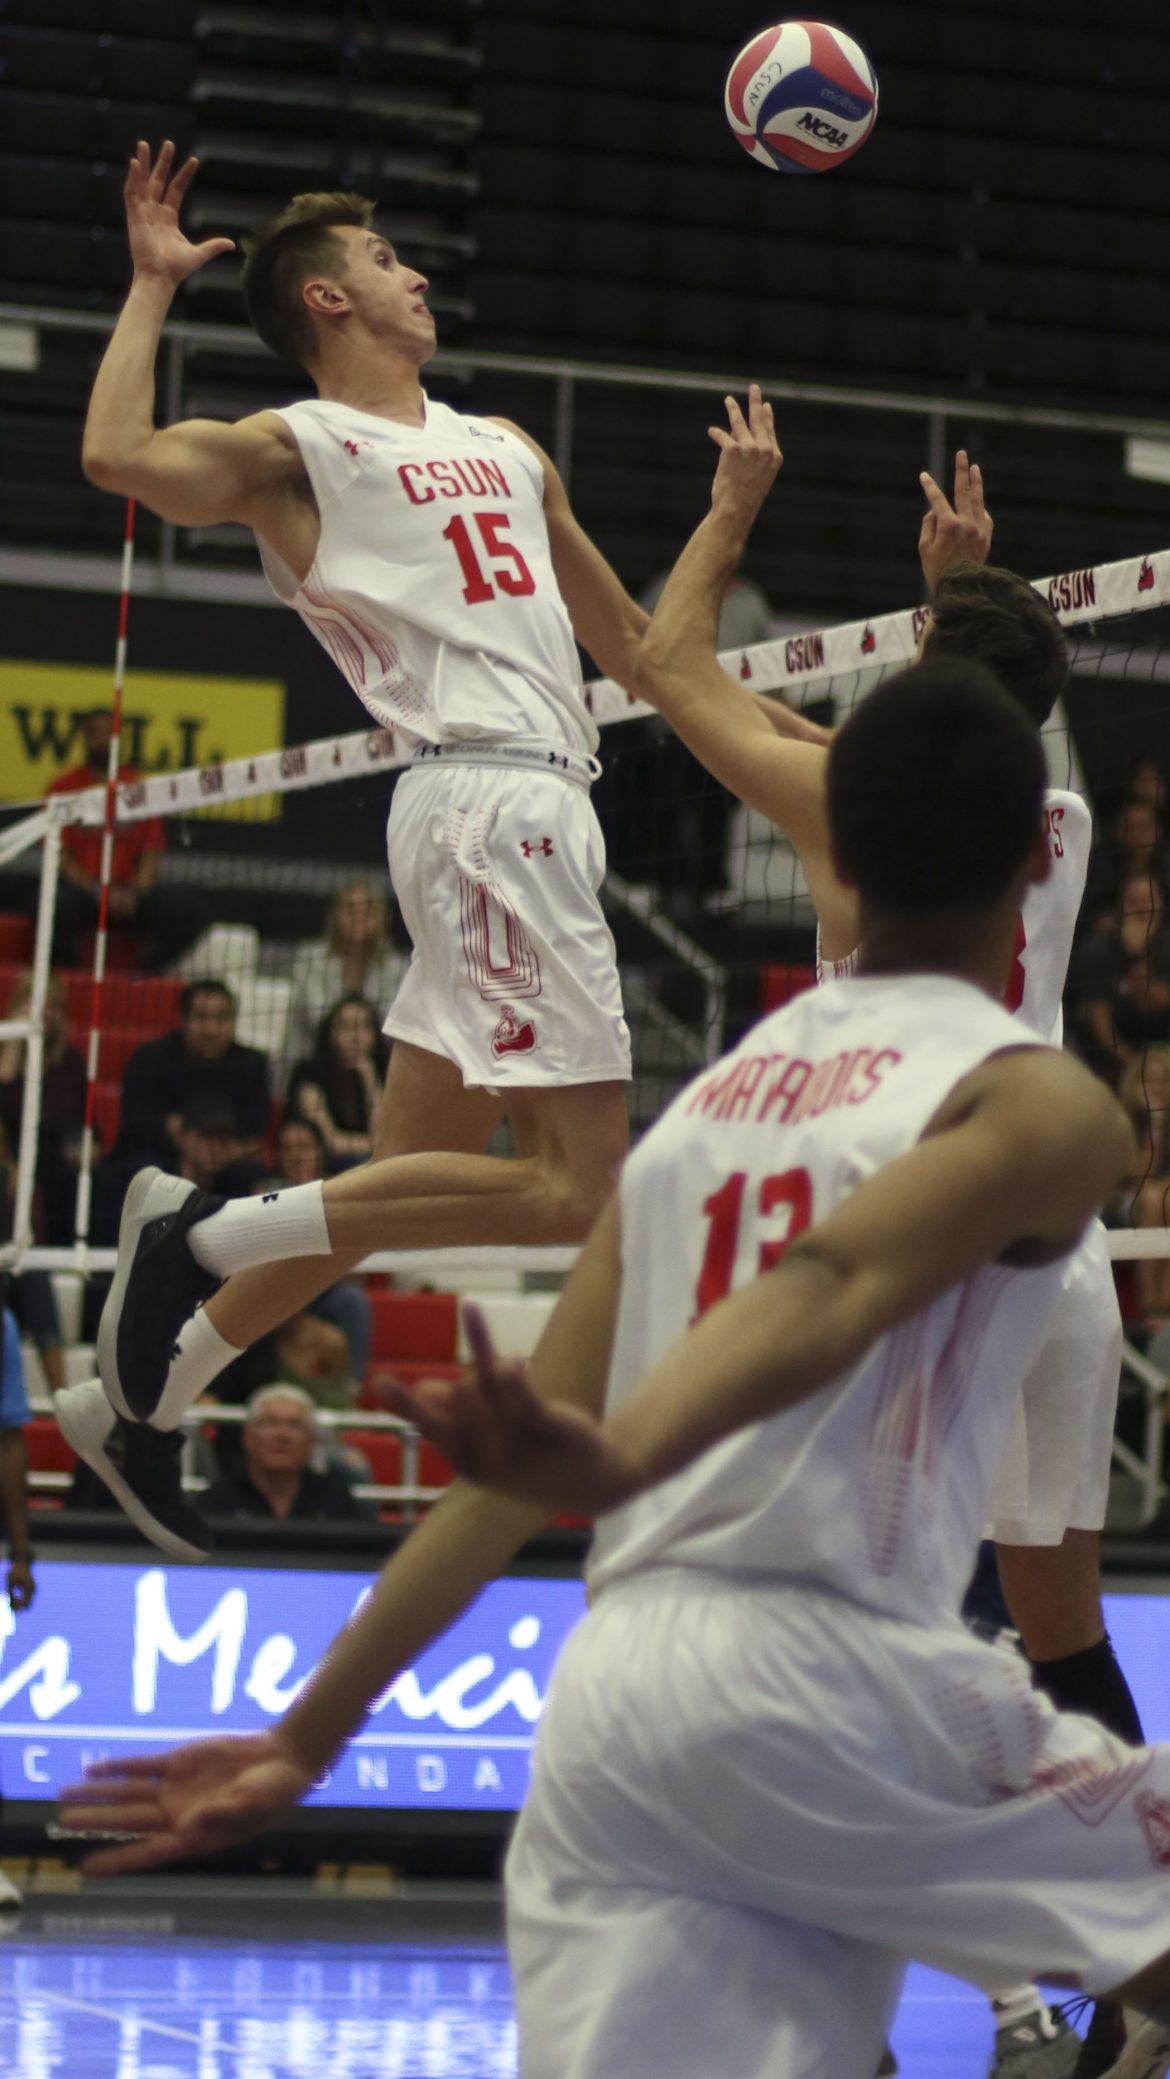 Eric Chance leaps above the net for a kill. Photo credit: Daniel Valencia